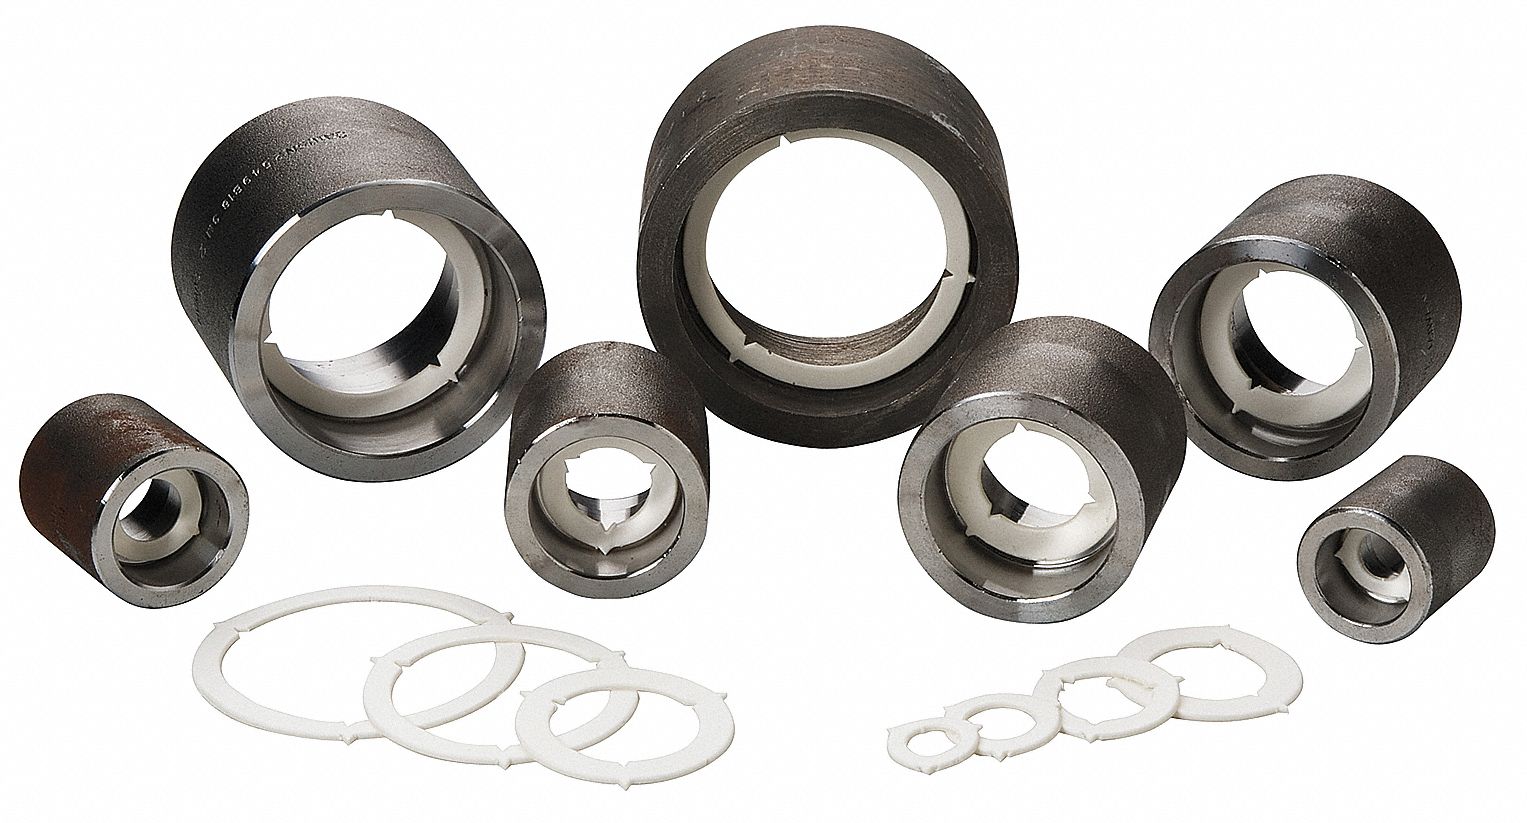 GAL Gage Gap-A-Let Socket Weld Contraction Rings Sold Per Each 1-1/2 NPS 